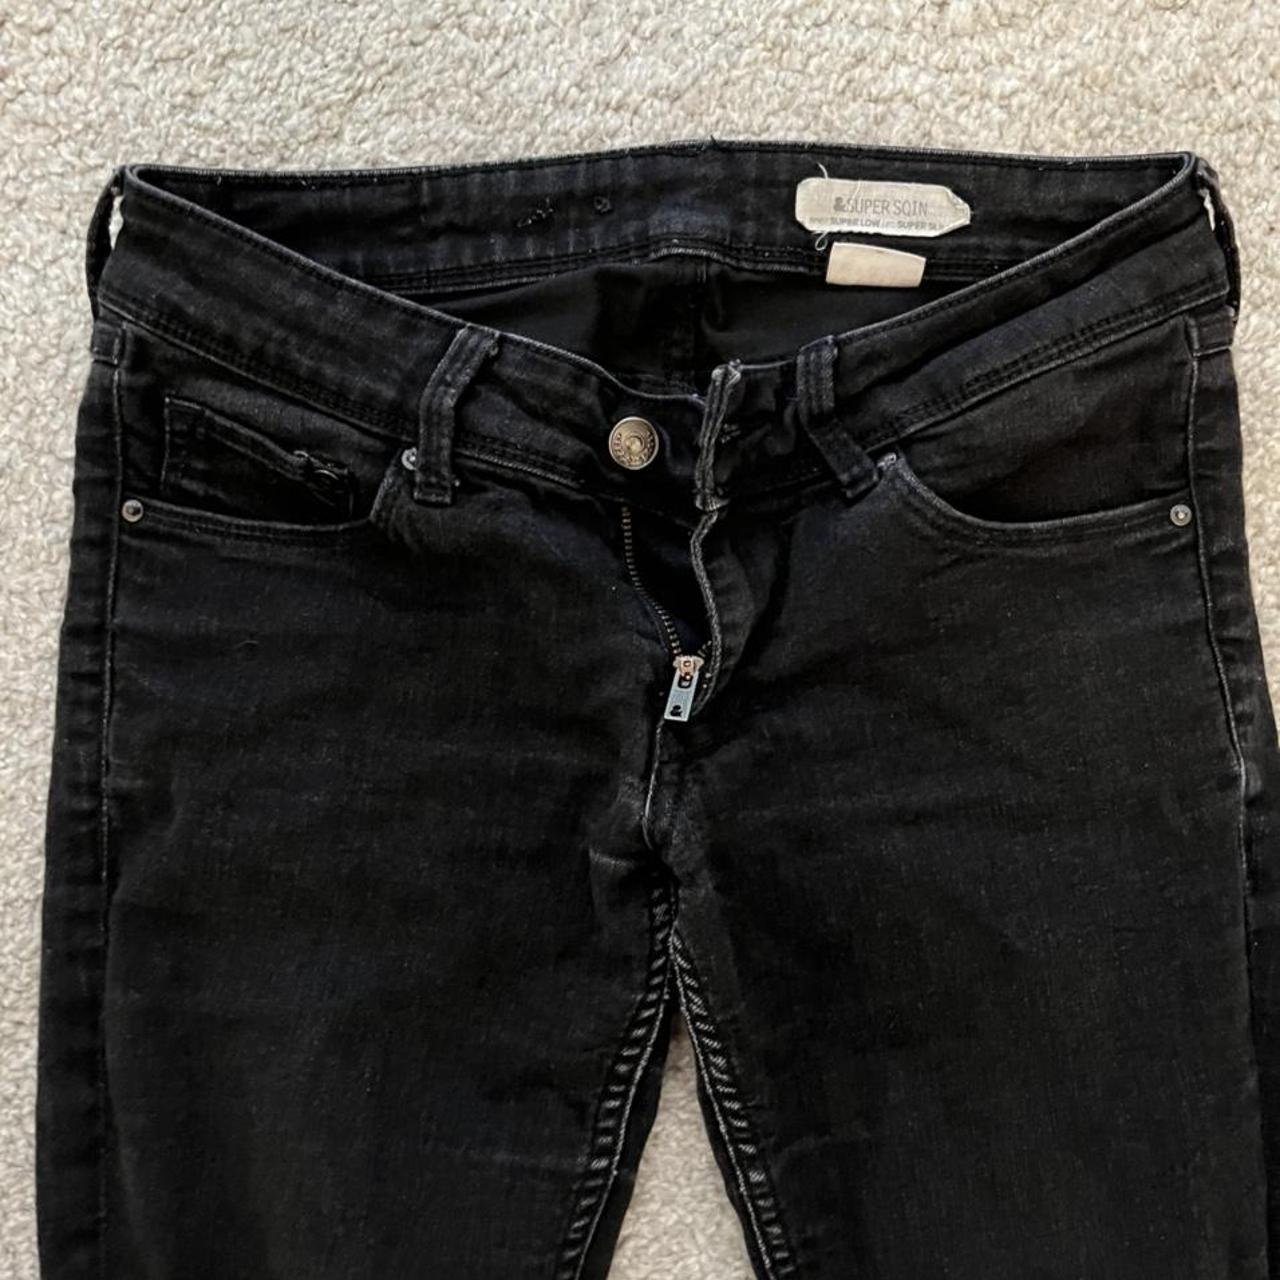 H&M jeans - worn but still in great condition -... - Depop